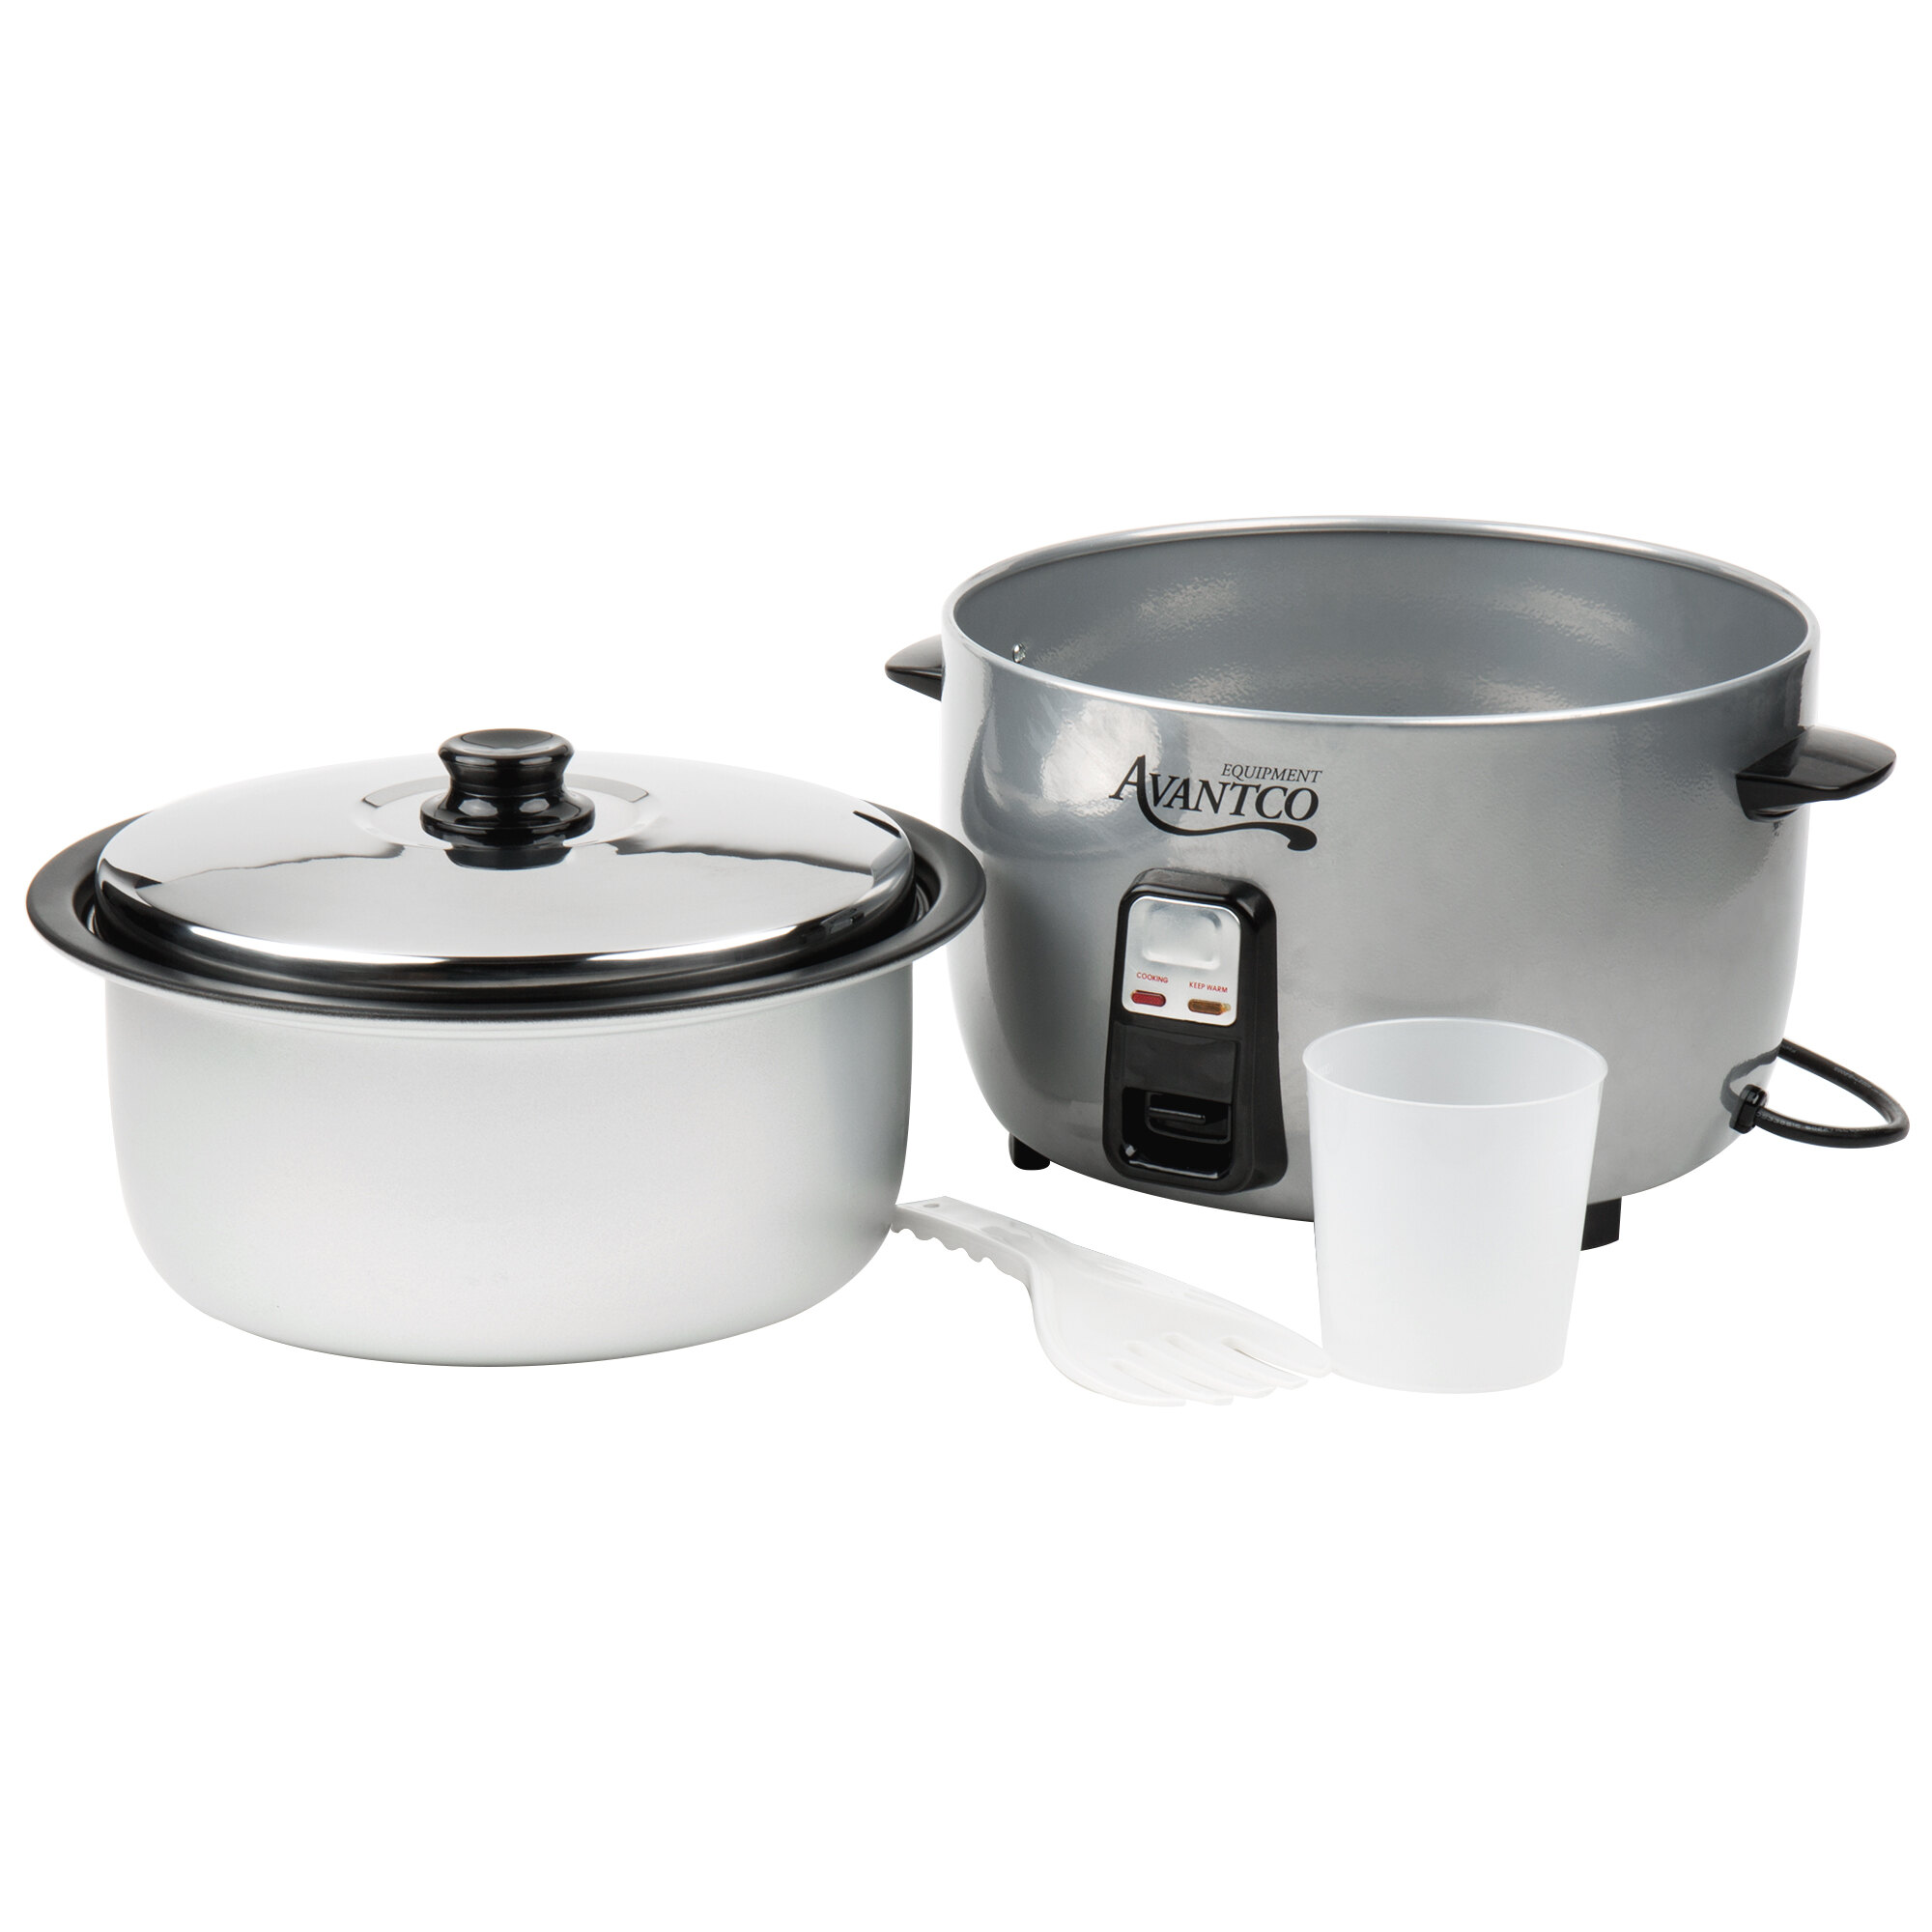 Avantco RC23161 46 Cup (23 Cup Raw) Electric Rice Cooker / Warmer ...